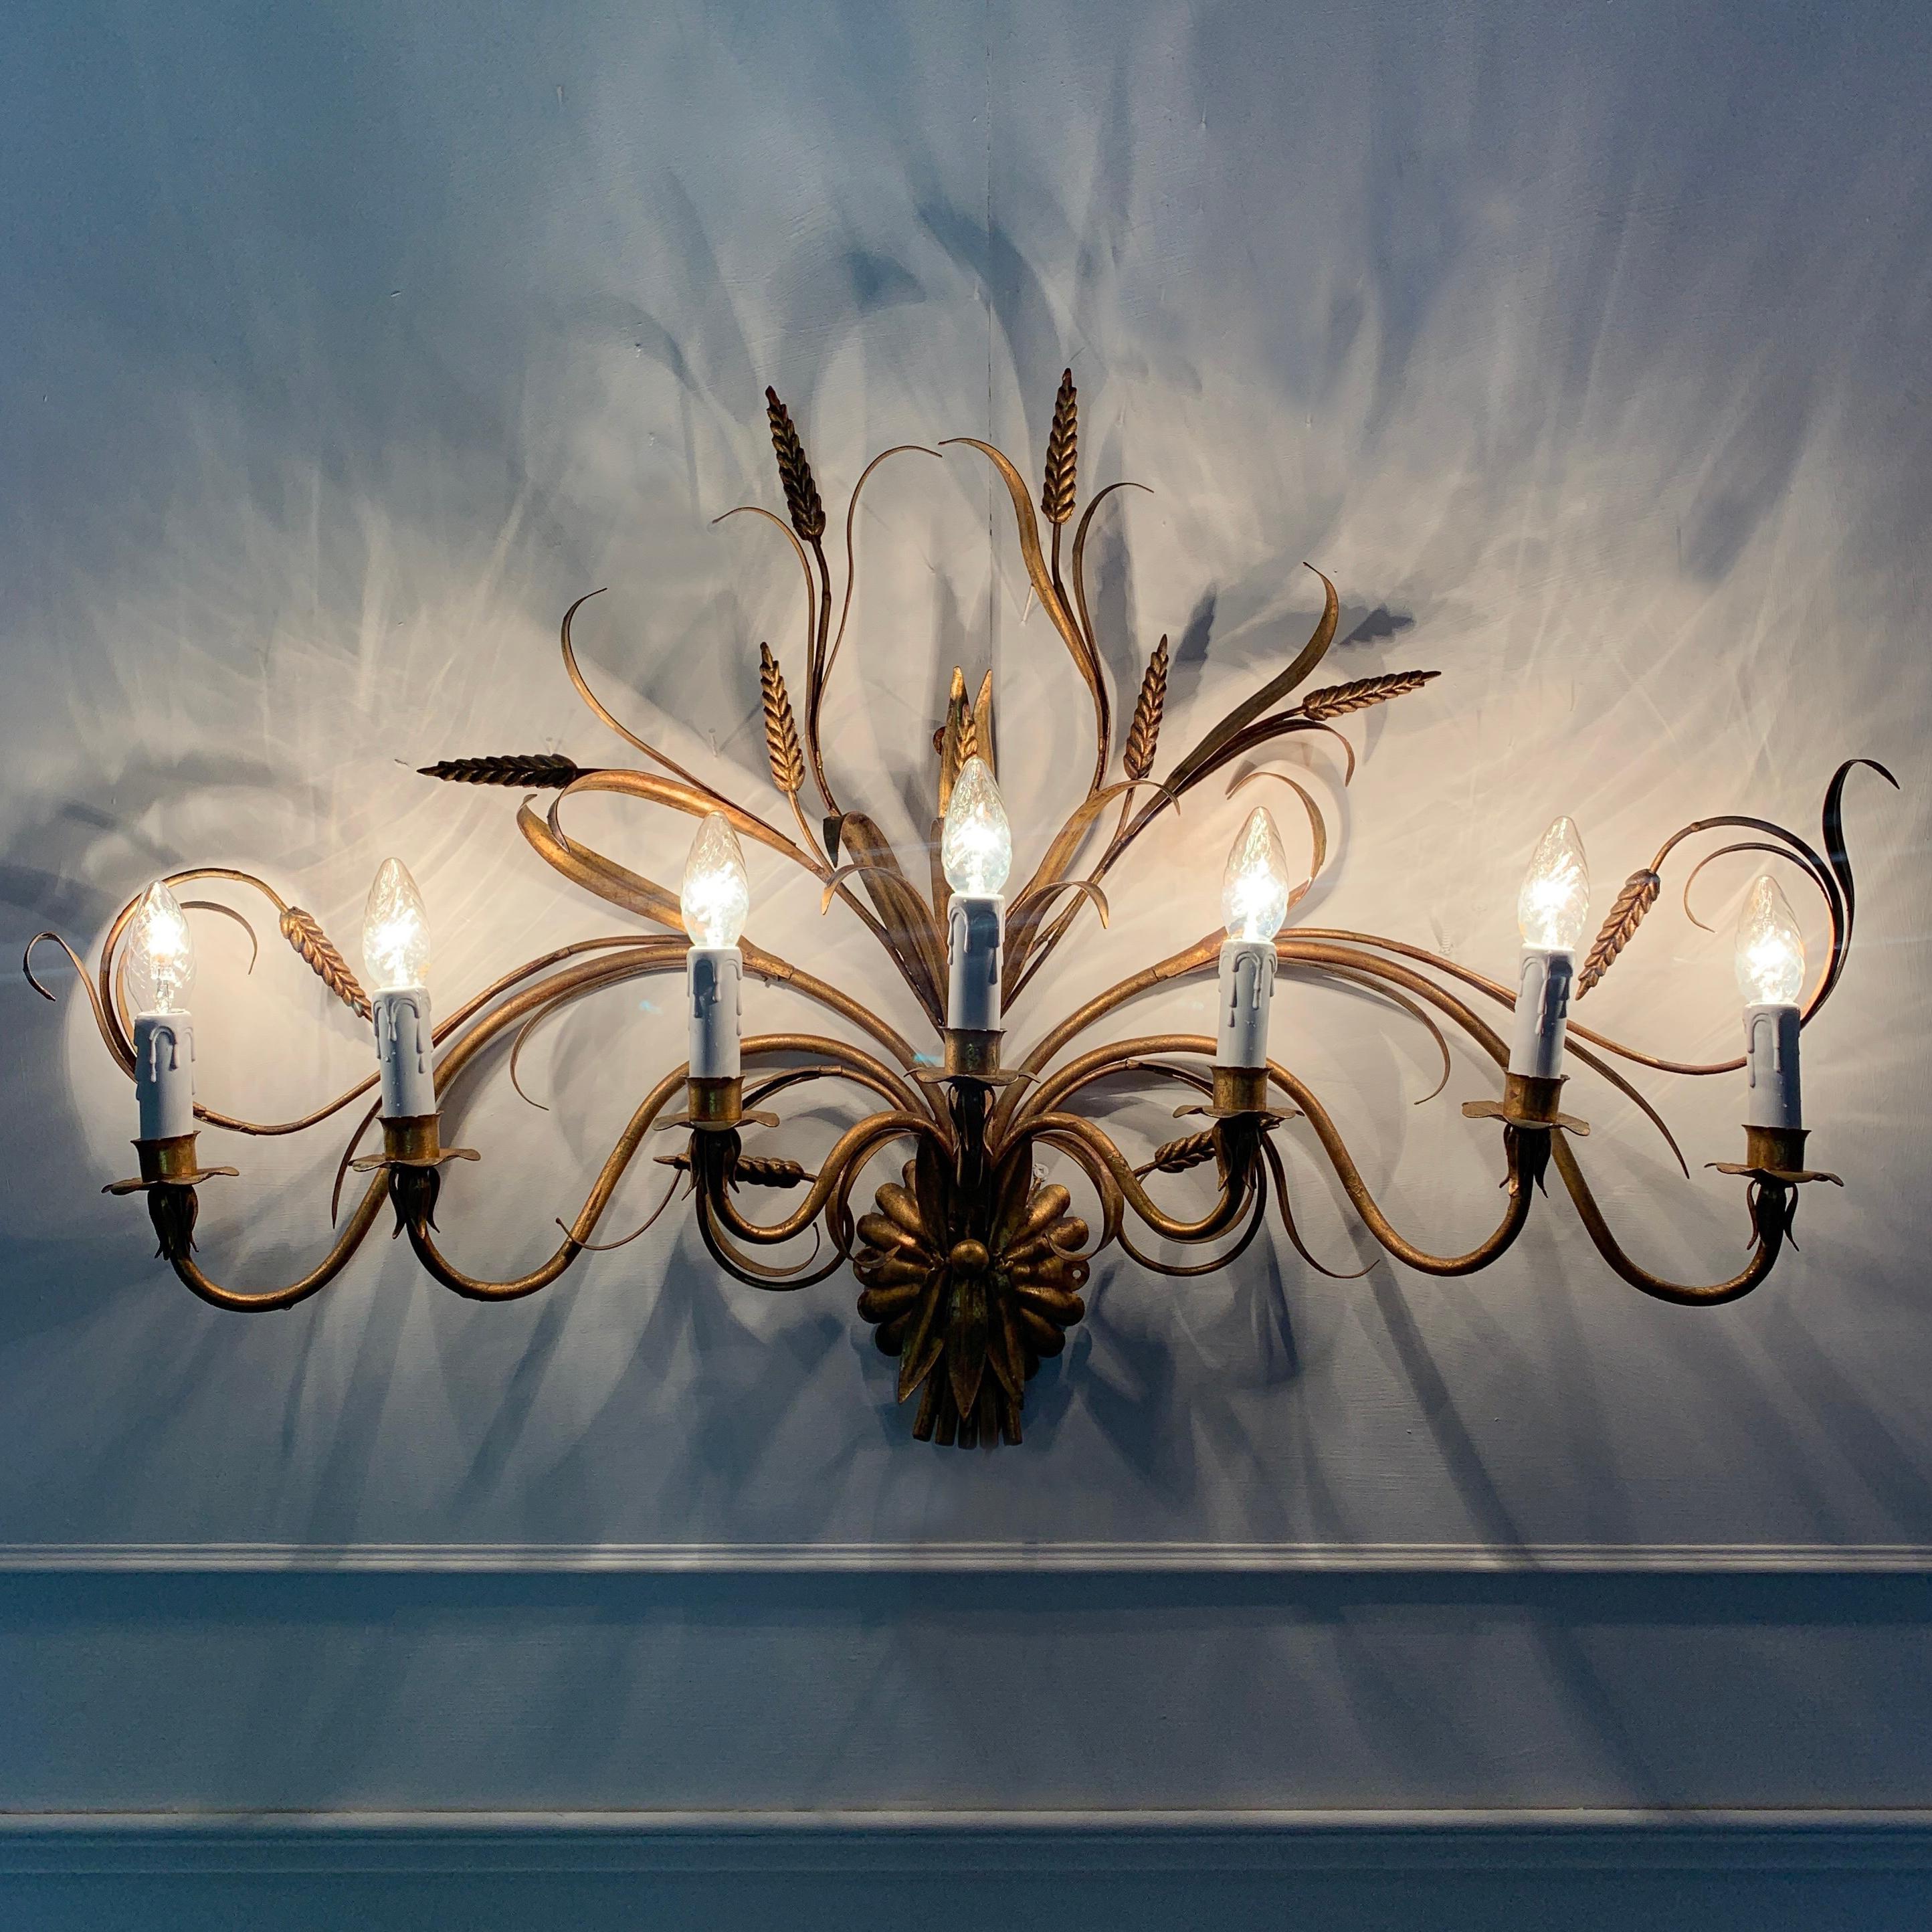 Large Hans Kögl wheat sheaf and leaves wall sconce
1970s Hans Kögl, Belgium

This very large and beautiful wall sconce is a real statement piece
There are 7 handcrafted curved gilt stems, decorated fully with gilt leaves and wheat sheaf